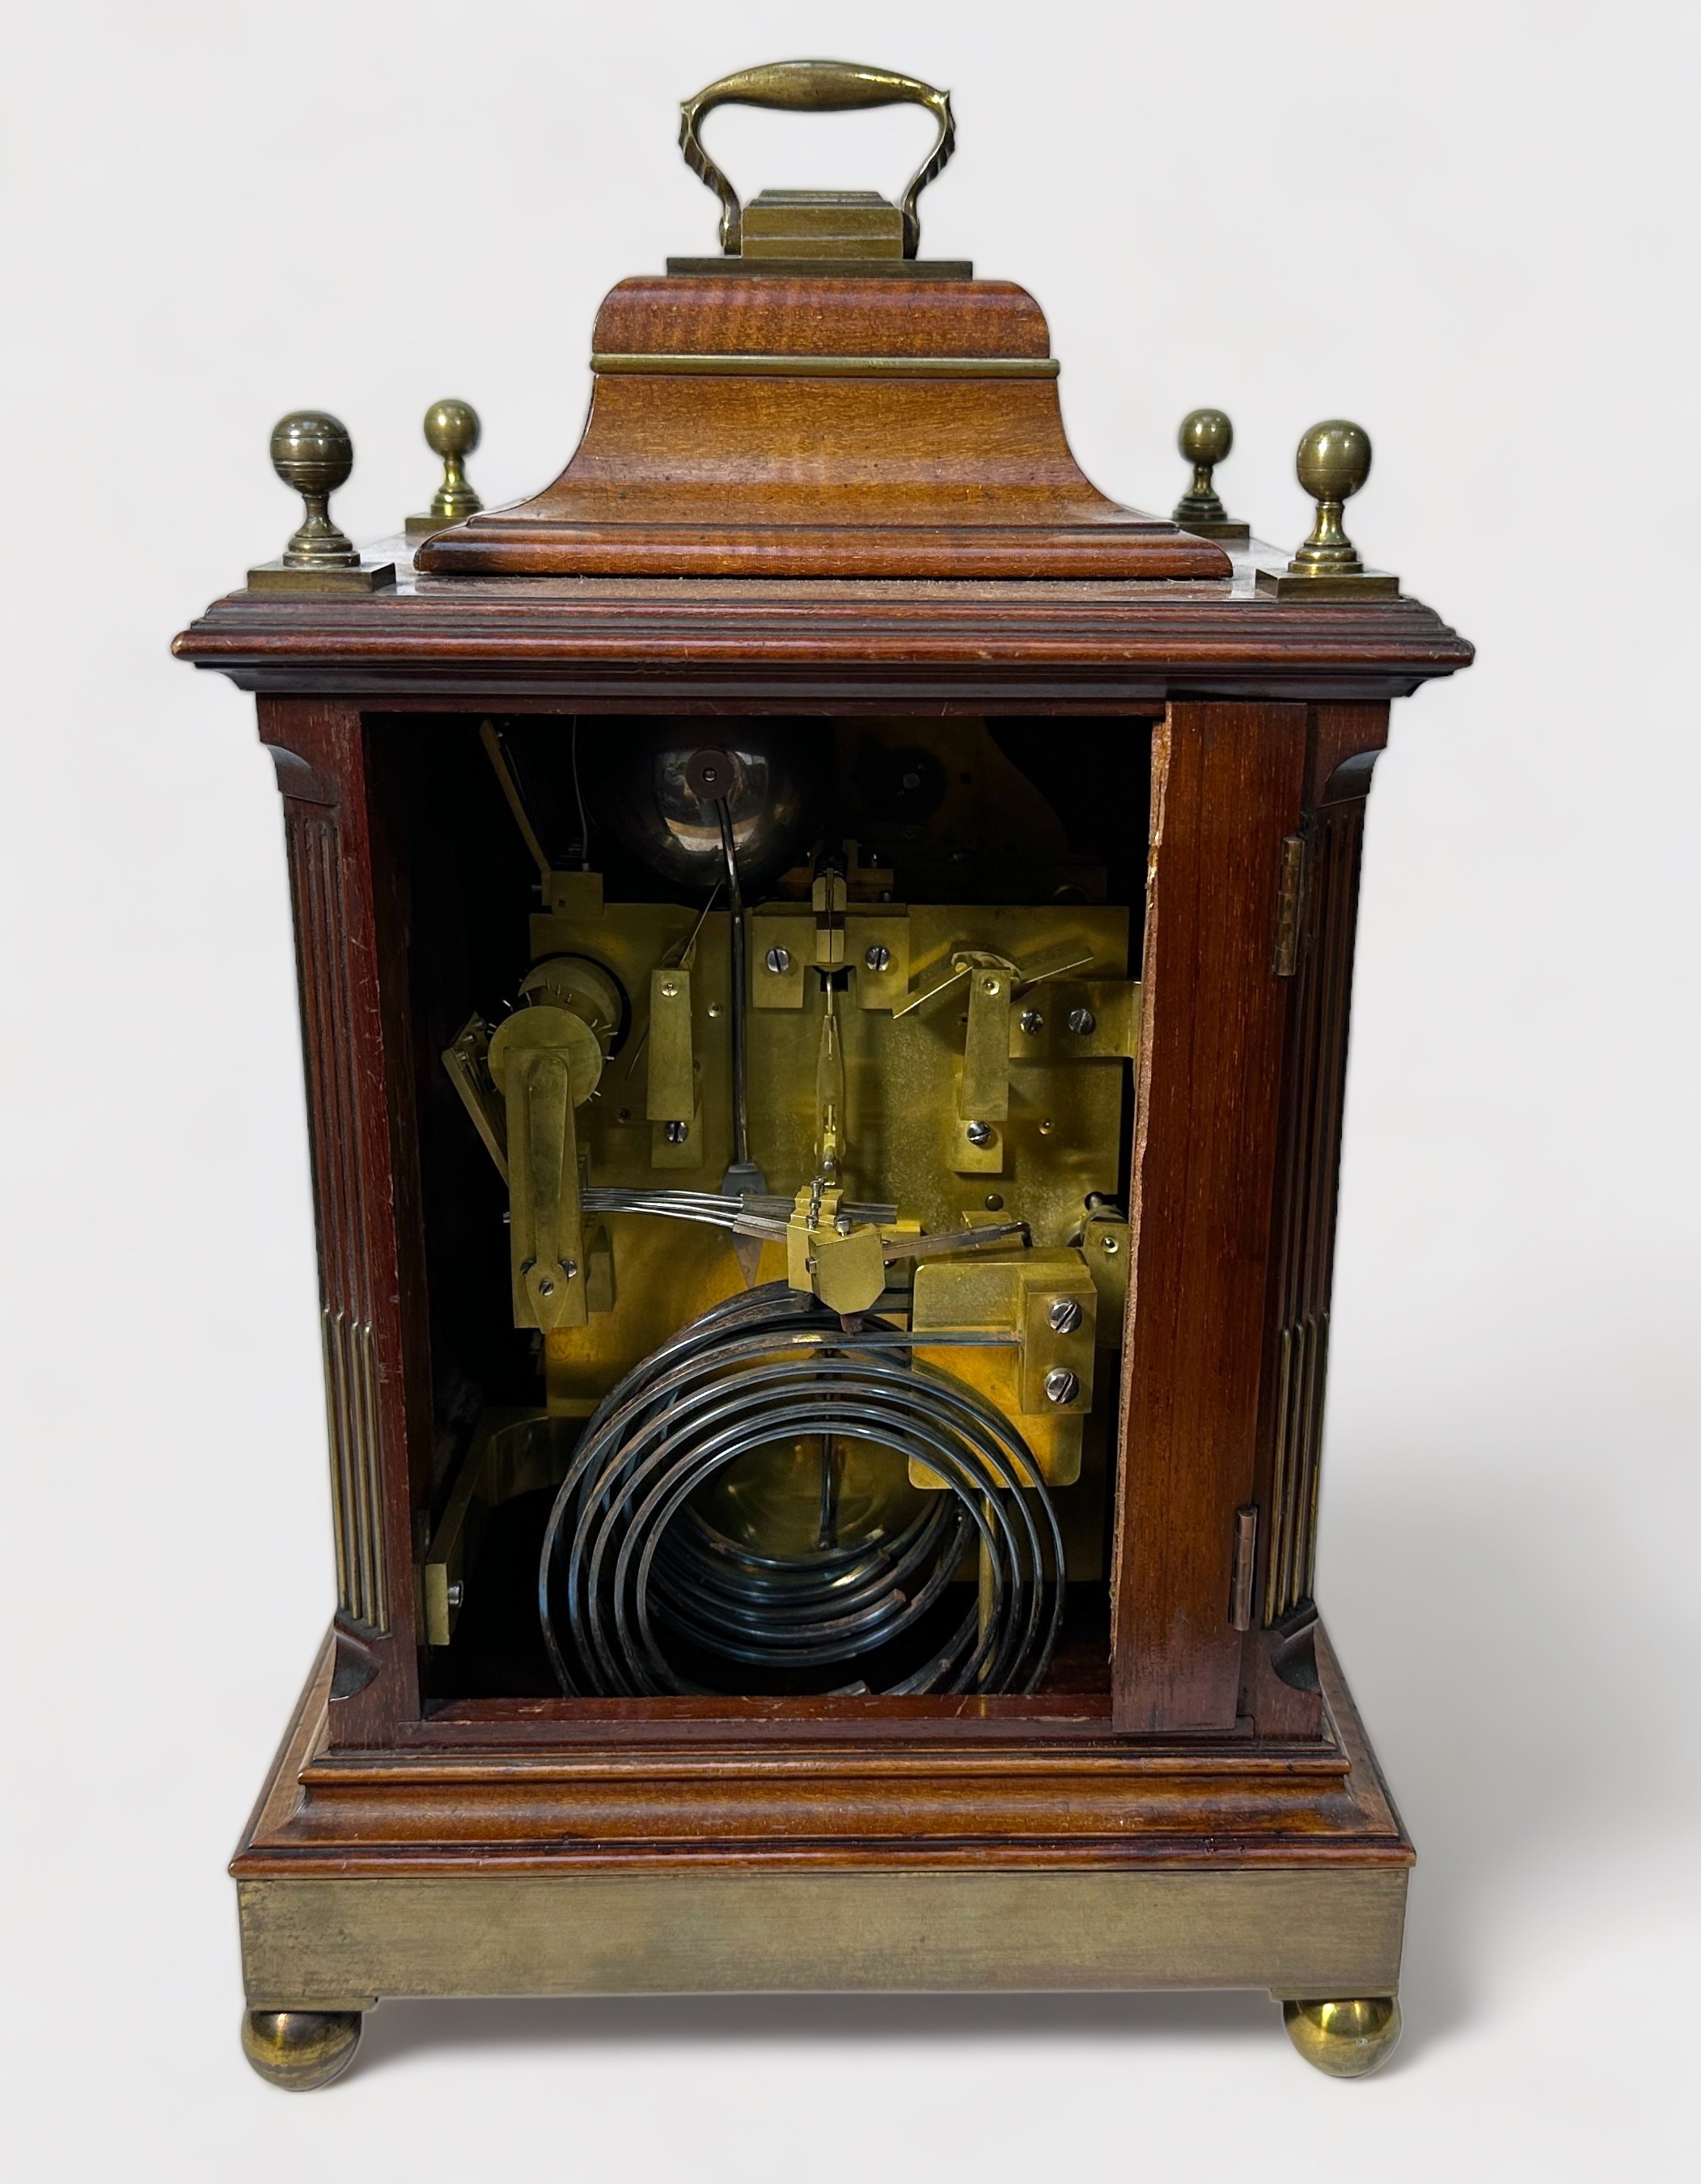 A Late 19th/early 20th century Mahogany Bracket clock by John Bull, Bedford, with Eight-Day three- - Image 3 of 4